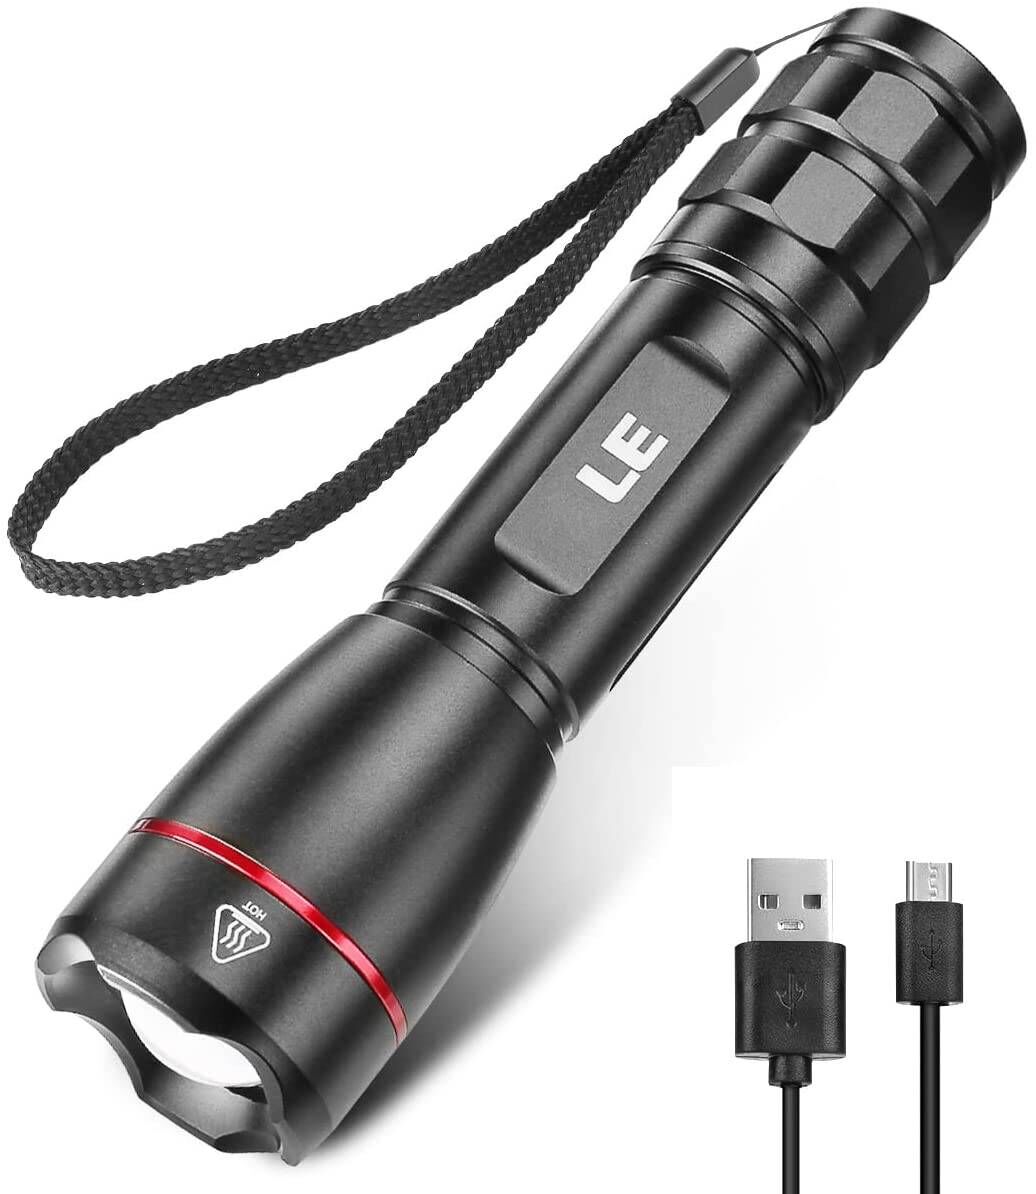 LED Flashlight Hunting Survival Bright Tactical Beam #SP9197 Work 